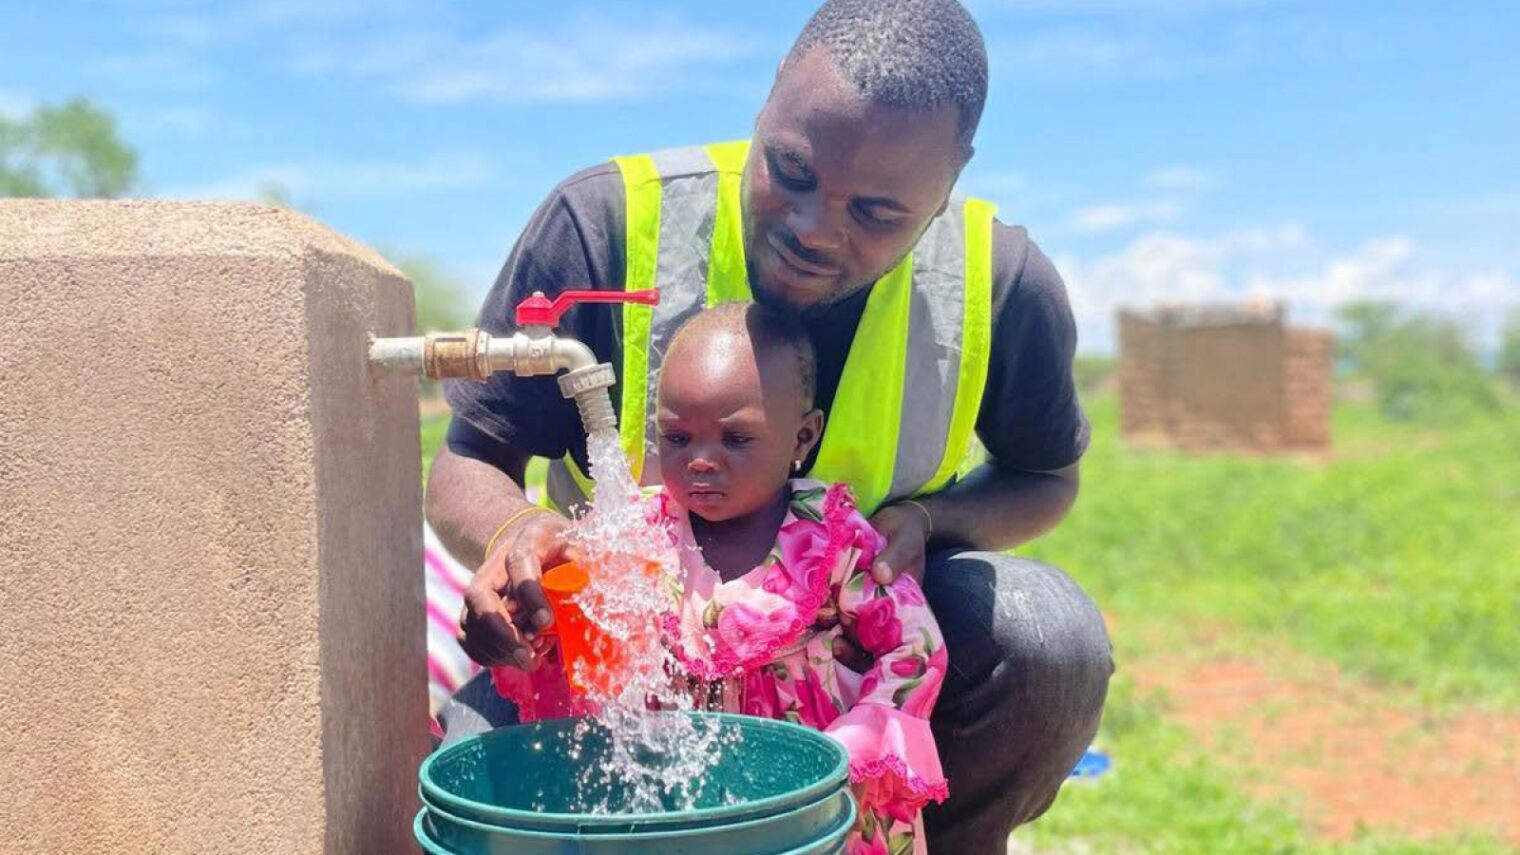 Richard Dickson, a field hydrogeologist for Innovation: Africa in Tanzania, introducing a child to the wonders of running water in Mkoka Village. Photo courtesy of Innovation: Africa